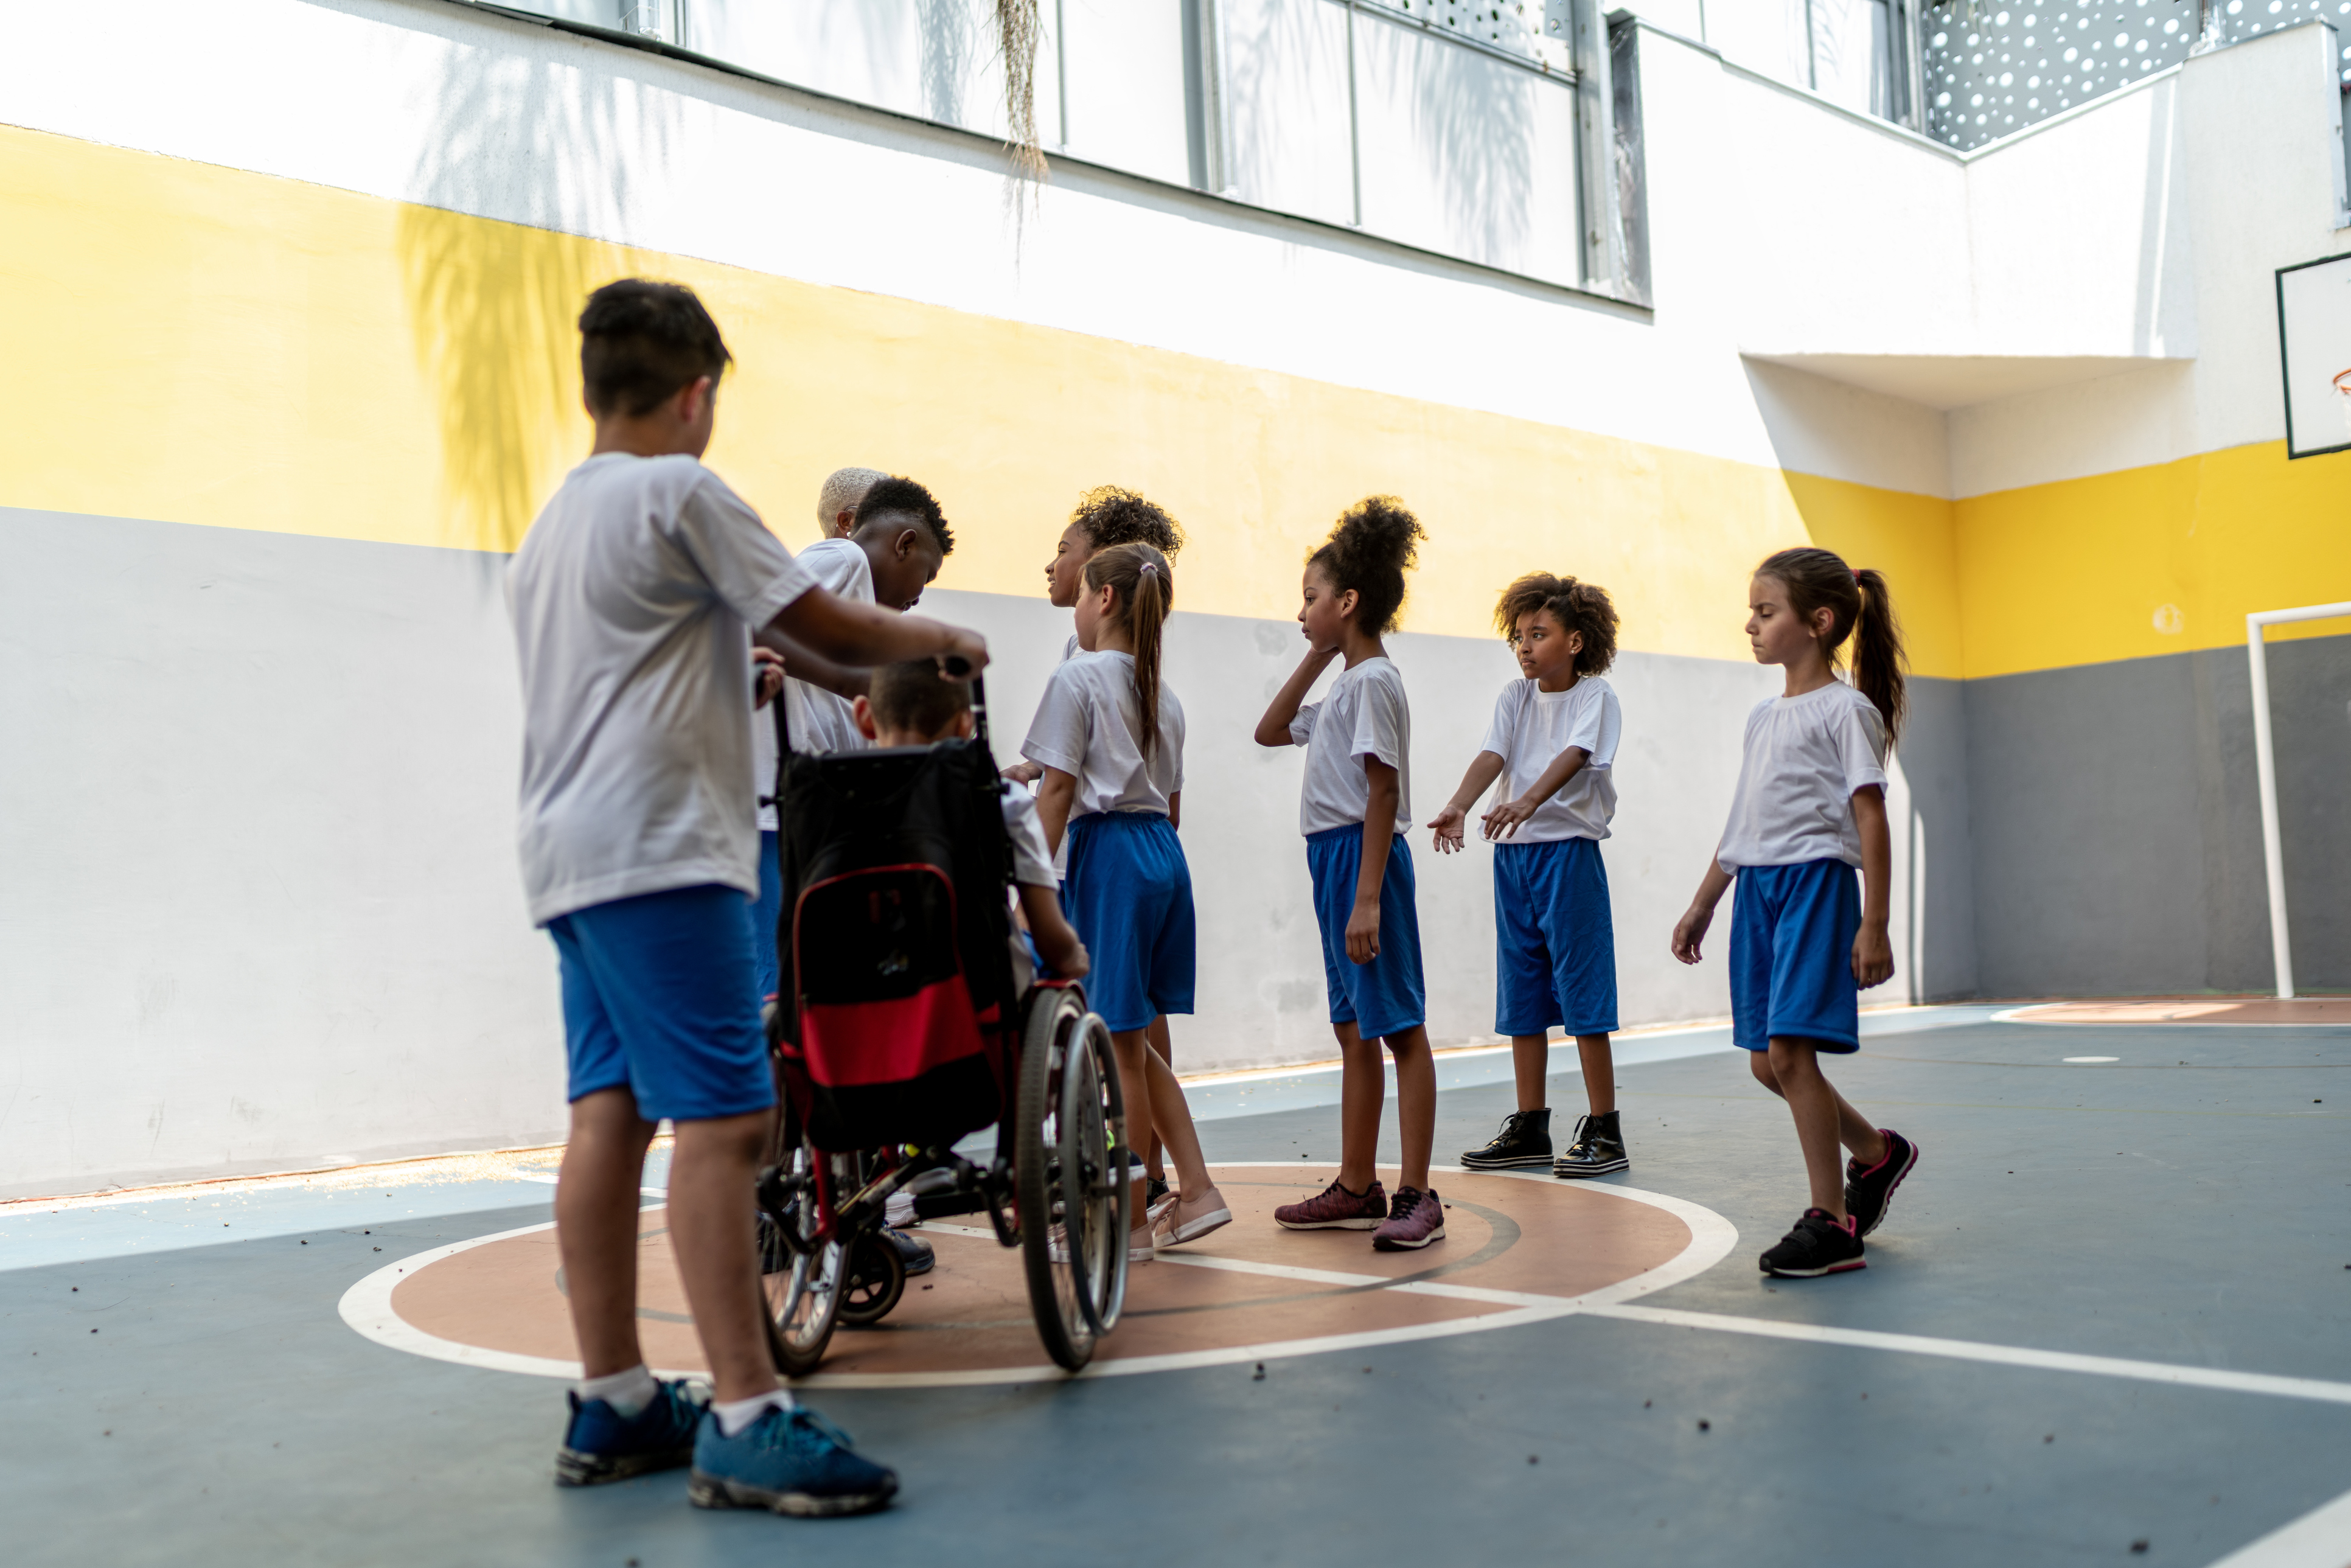 In a gymnasium, a diverse group of students wearing matching uniforms cluster around a teacher for instruction. The students display a range of gender presentations, skin tones, and hair textures. One of the students uses a wheelchair, and is being pushed by one of their peers to join the rest of the group. 